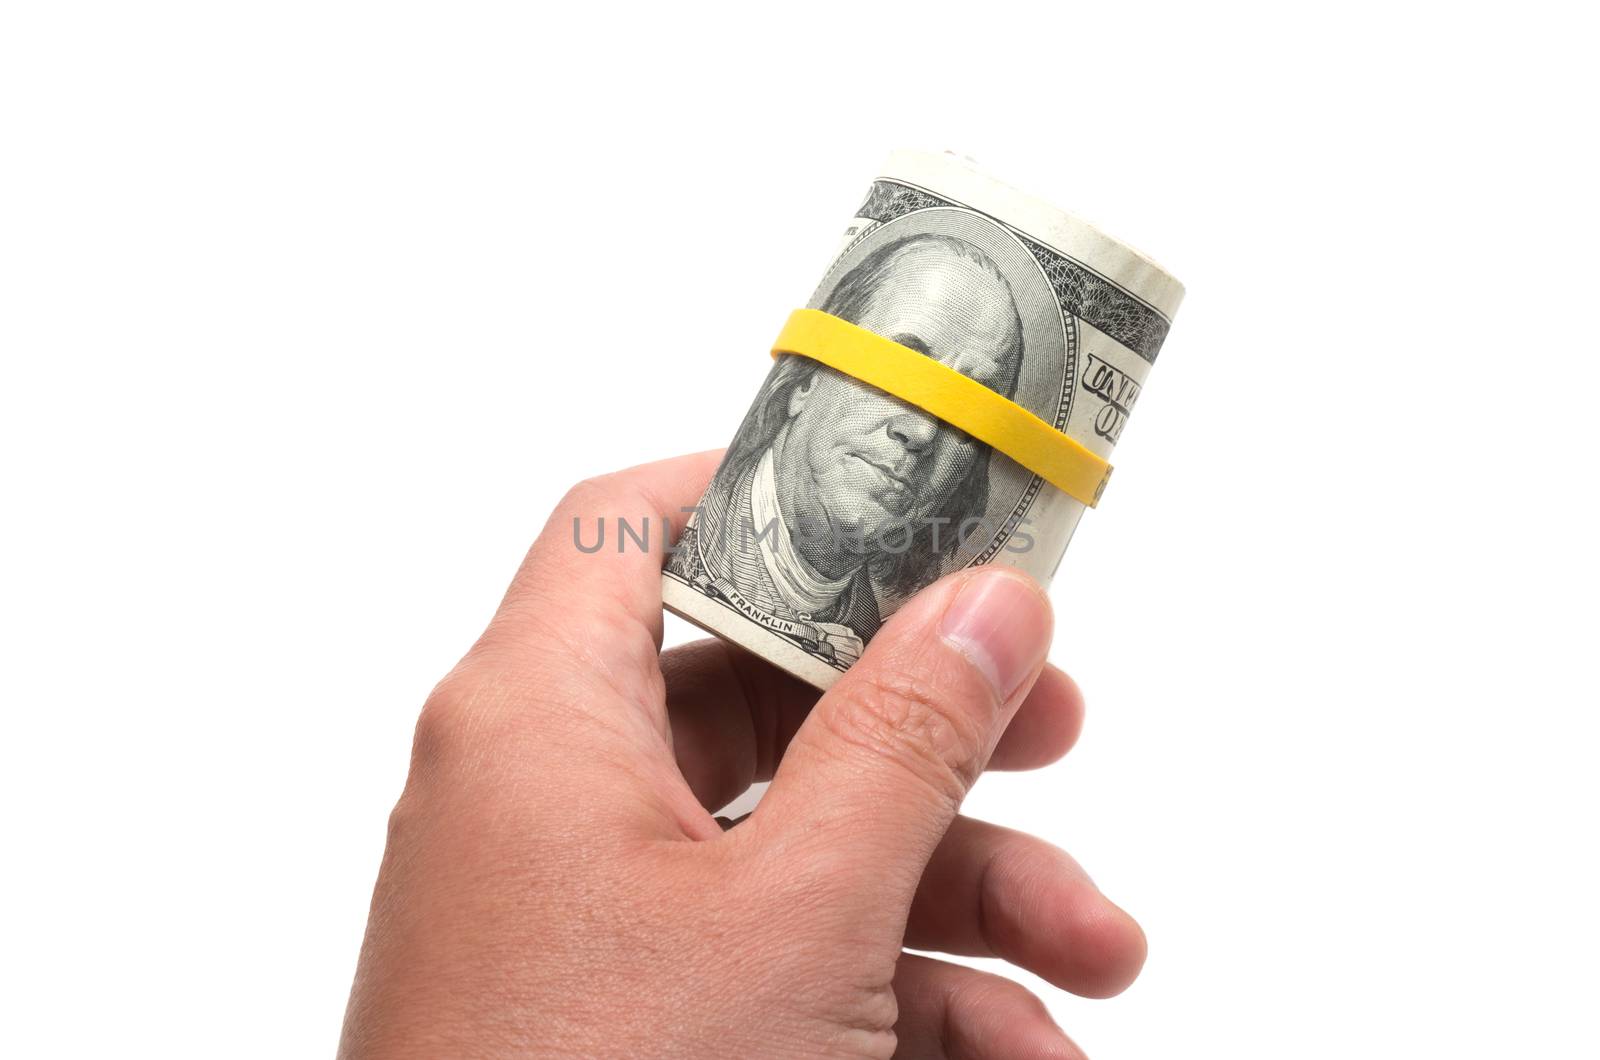 Roll of us bank notes with 100 dollars at the surface, yellow rubber band over the eyes